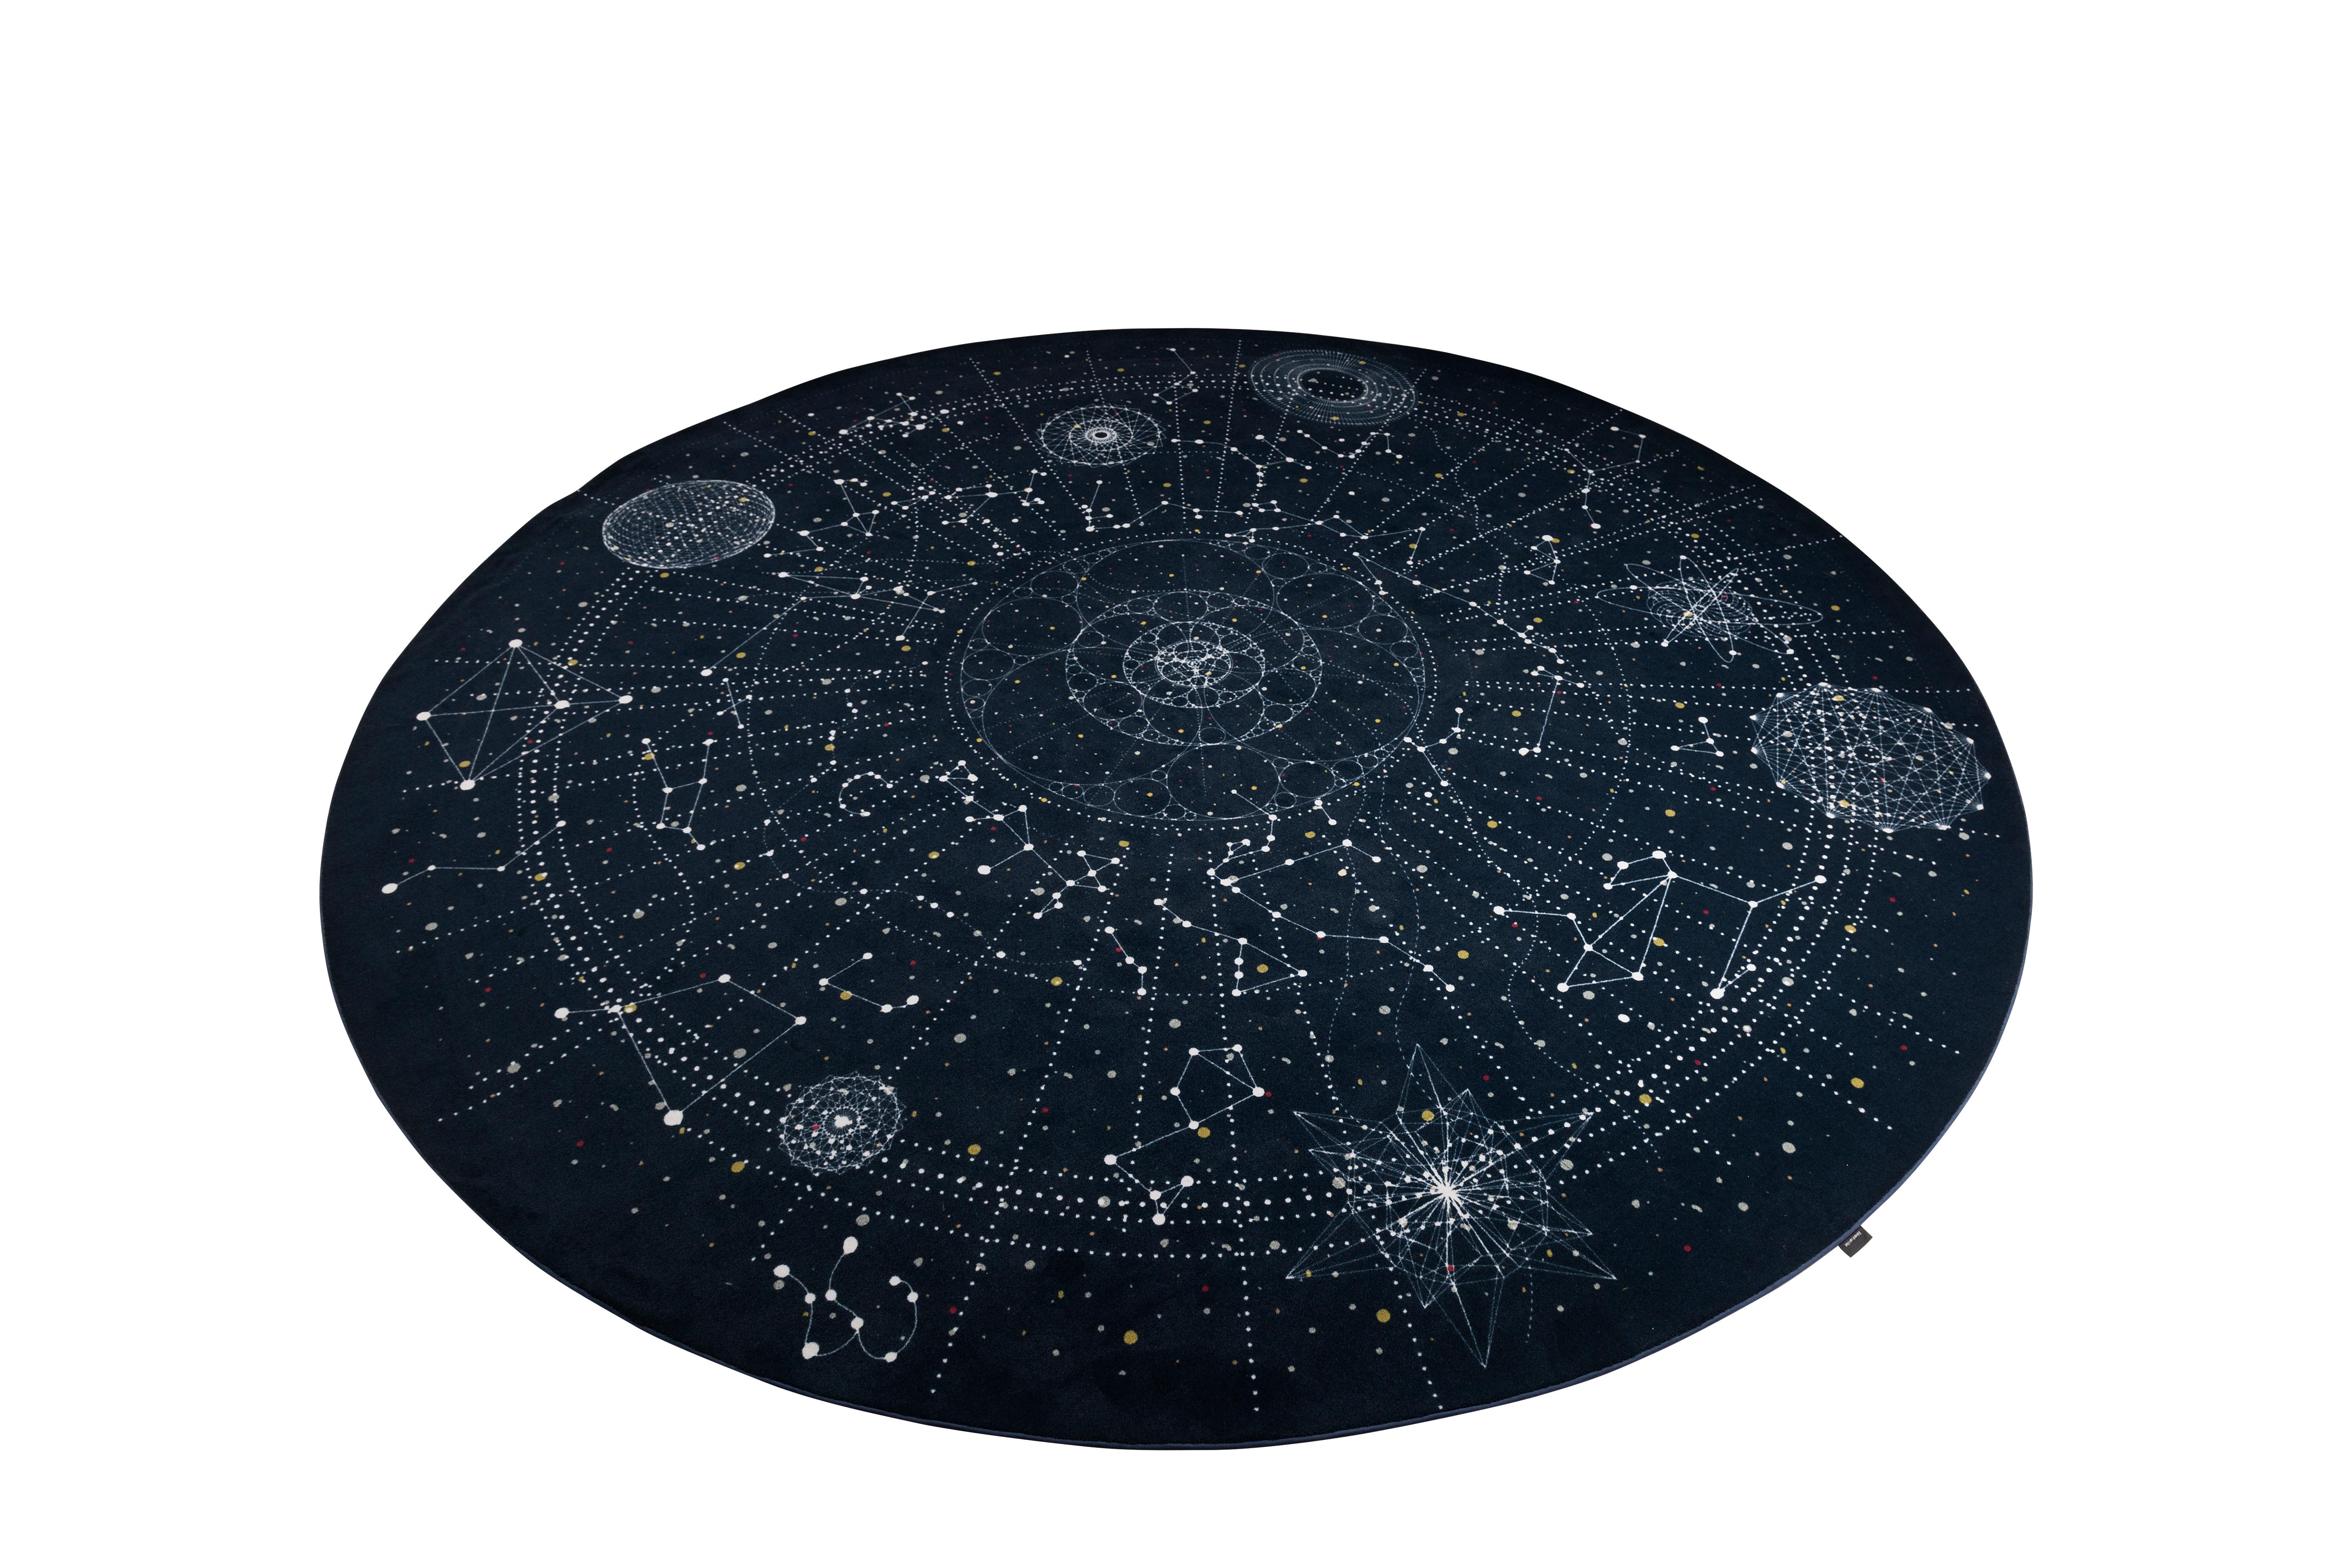 Moooi small Celestial rug in wool by Edward van Vliet

After his graduation from the Design Academy Eindhoven in 1989 – Edward belongs to the famous generation of Dutch designers who have been causing international sensation for many years now -